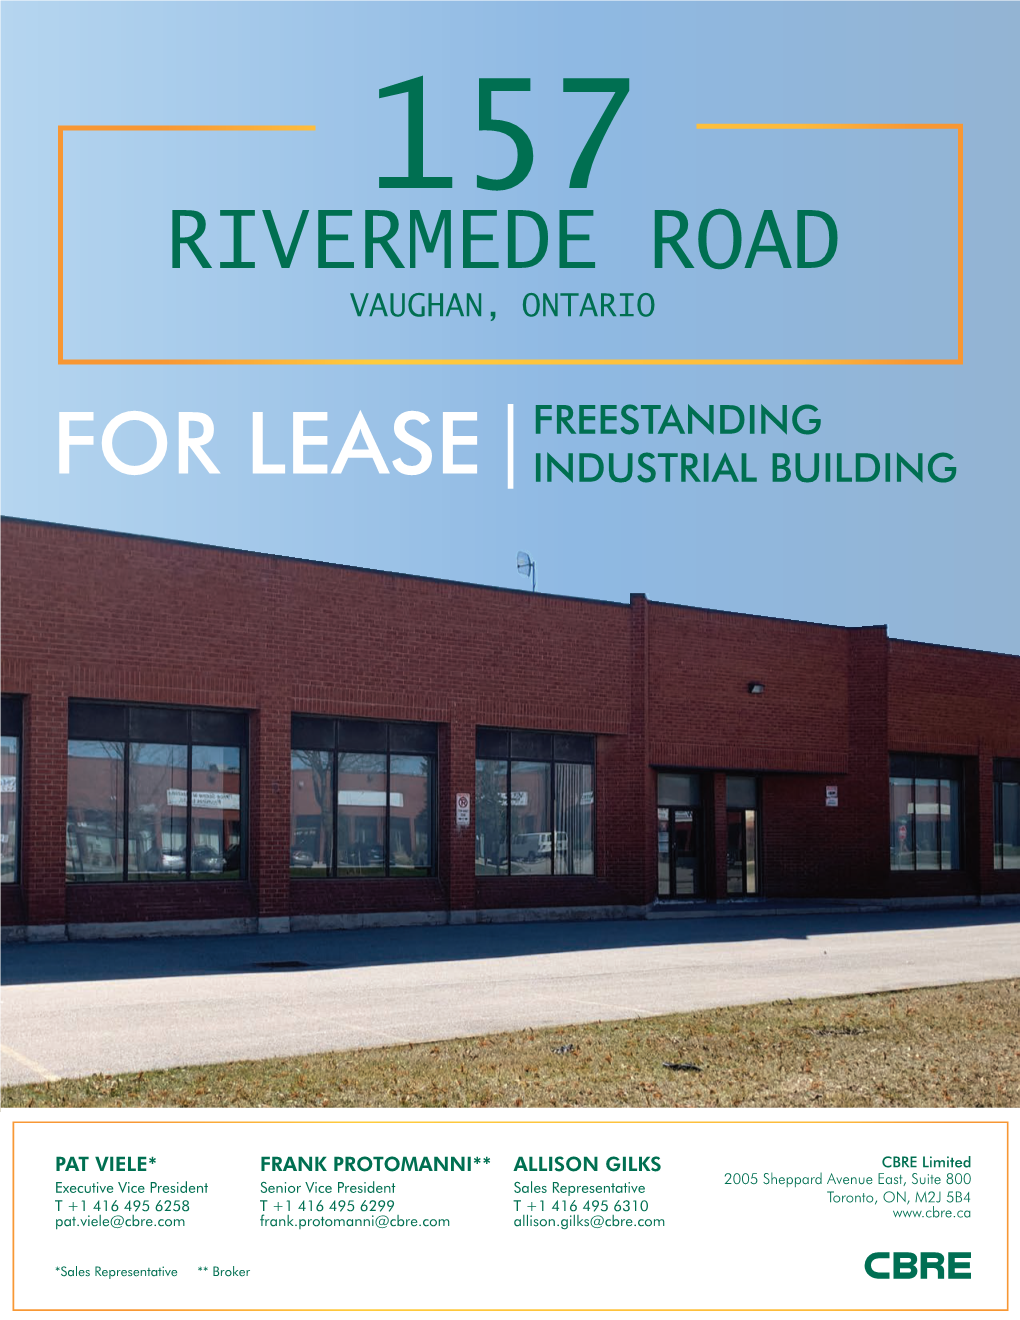 For Lease Industrial Building